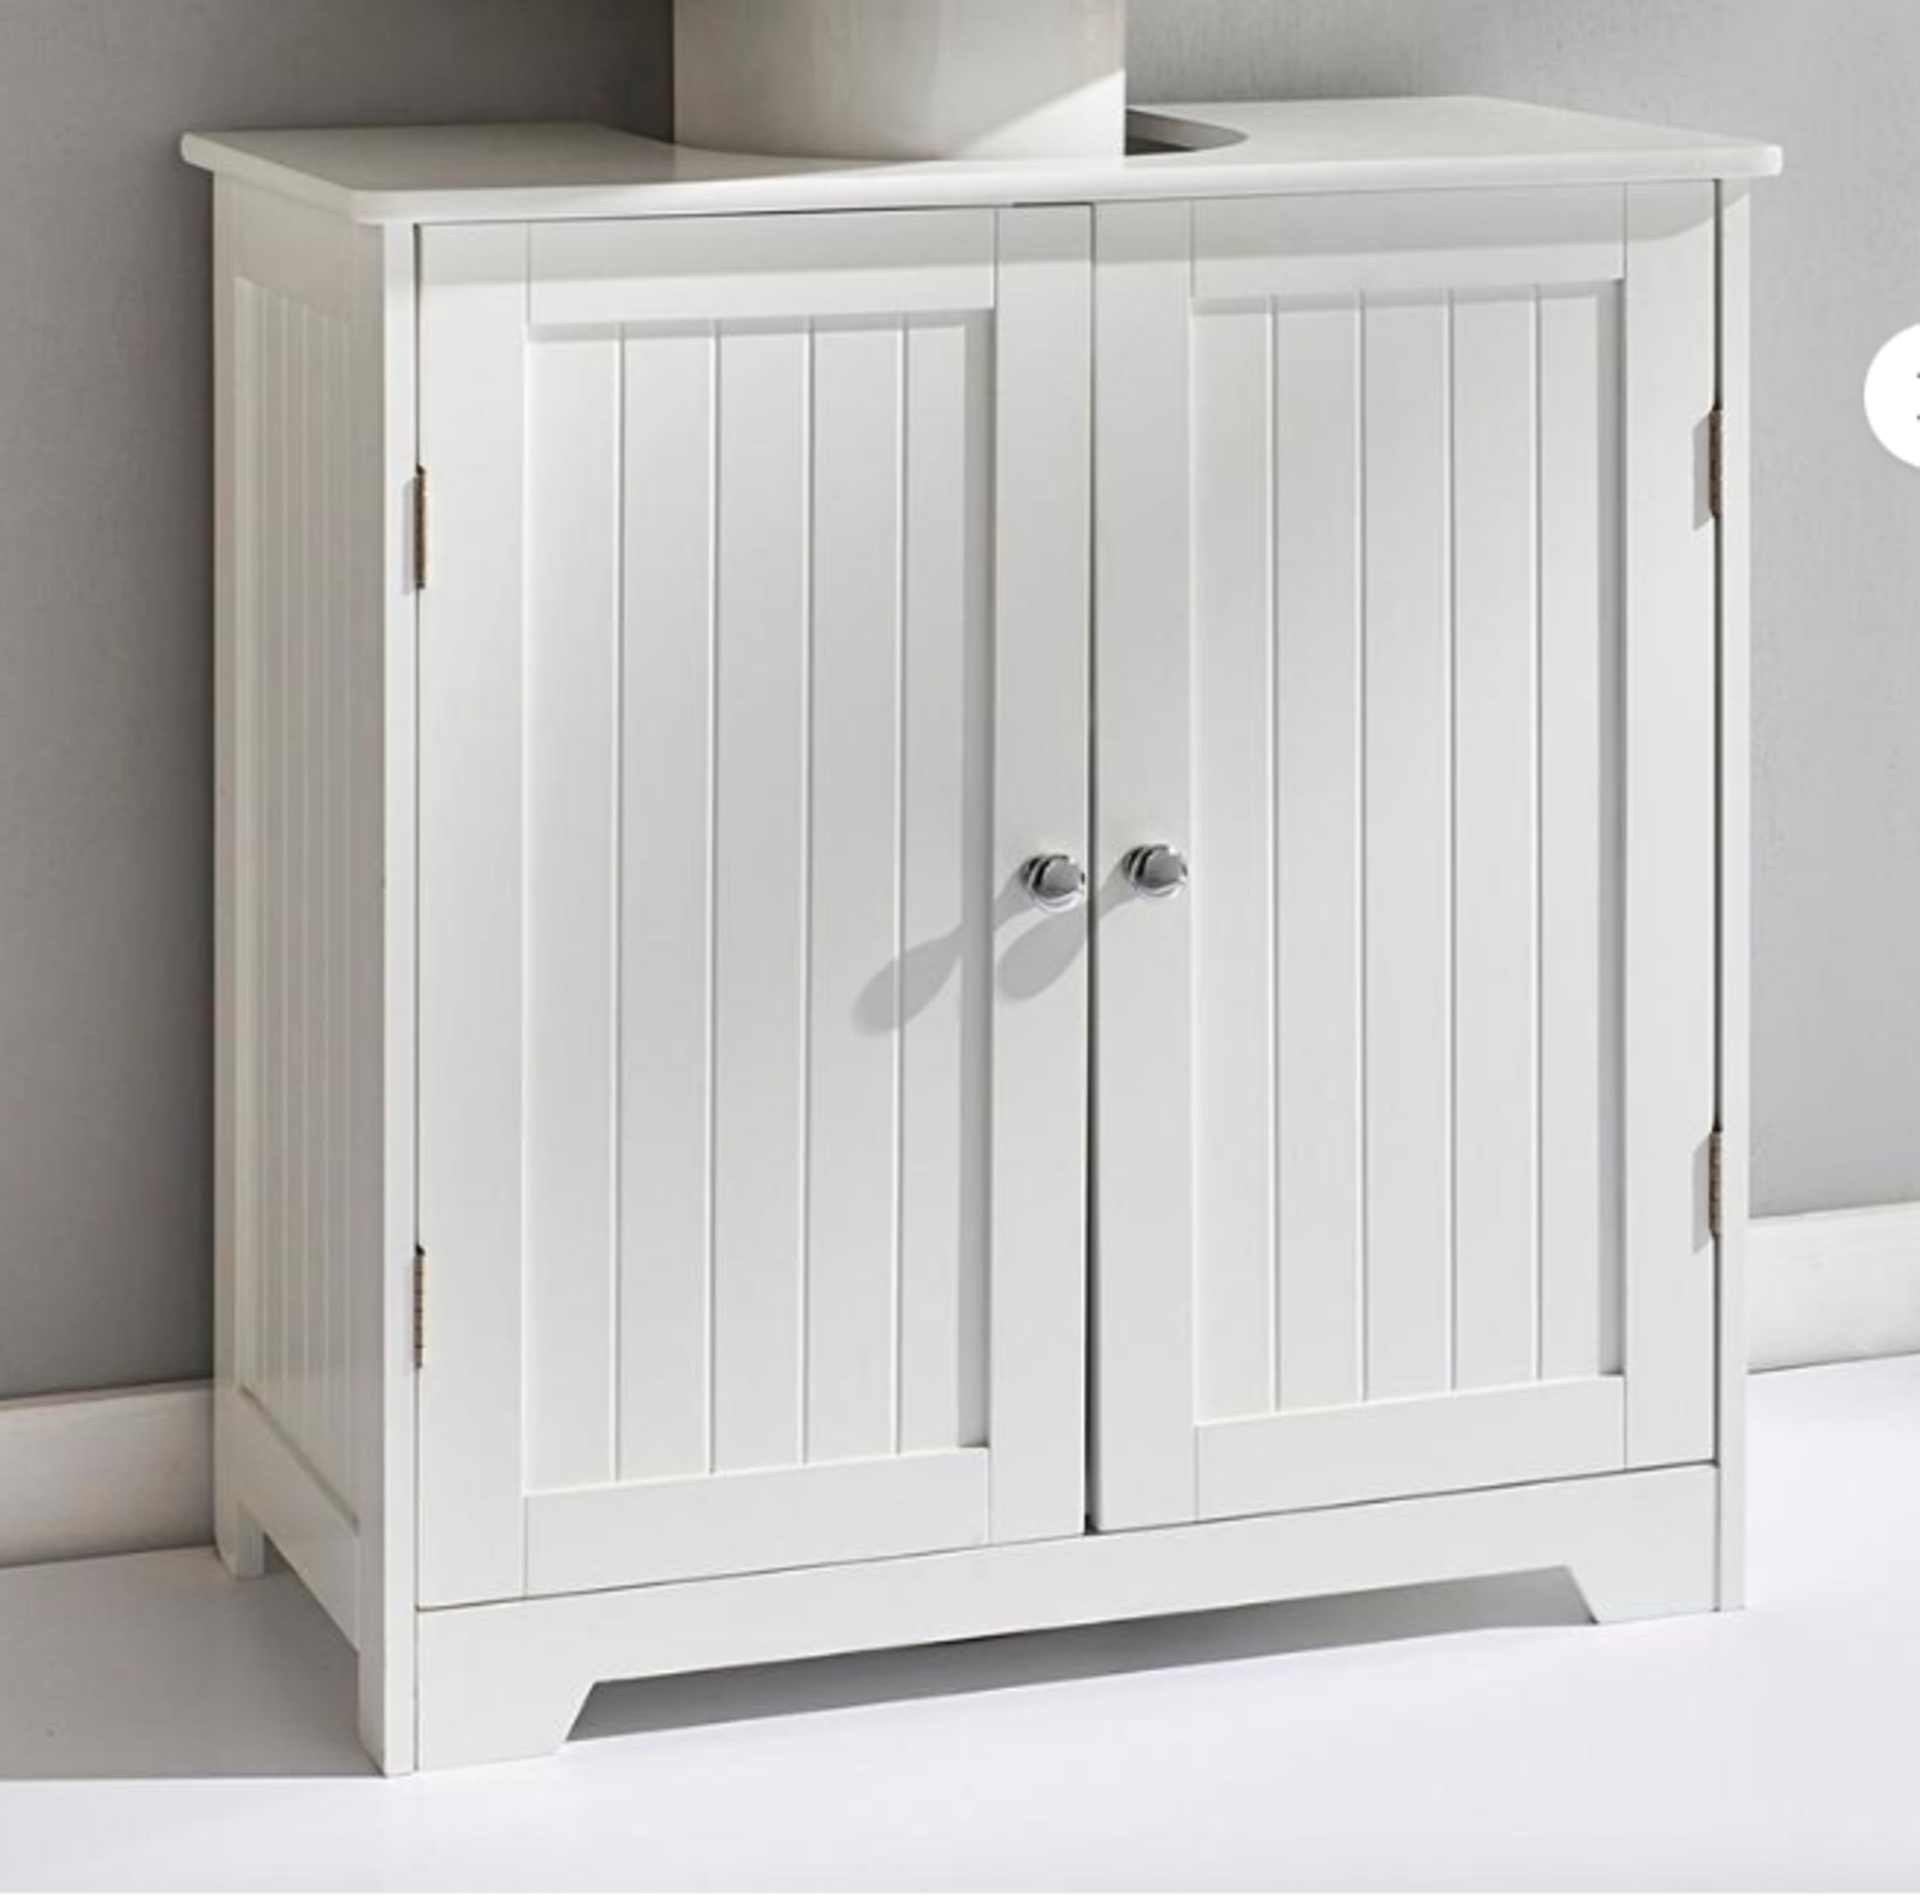 New England Underbasin Cupboard. Er27. Great value, easy to assemble, stylish shaker-style